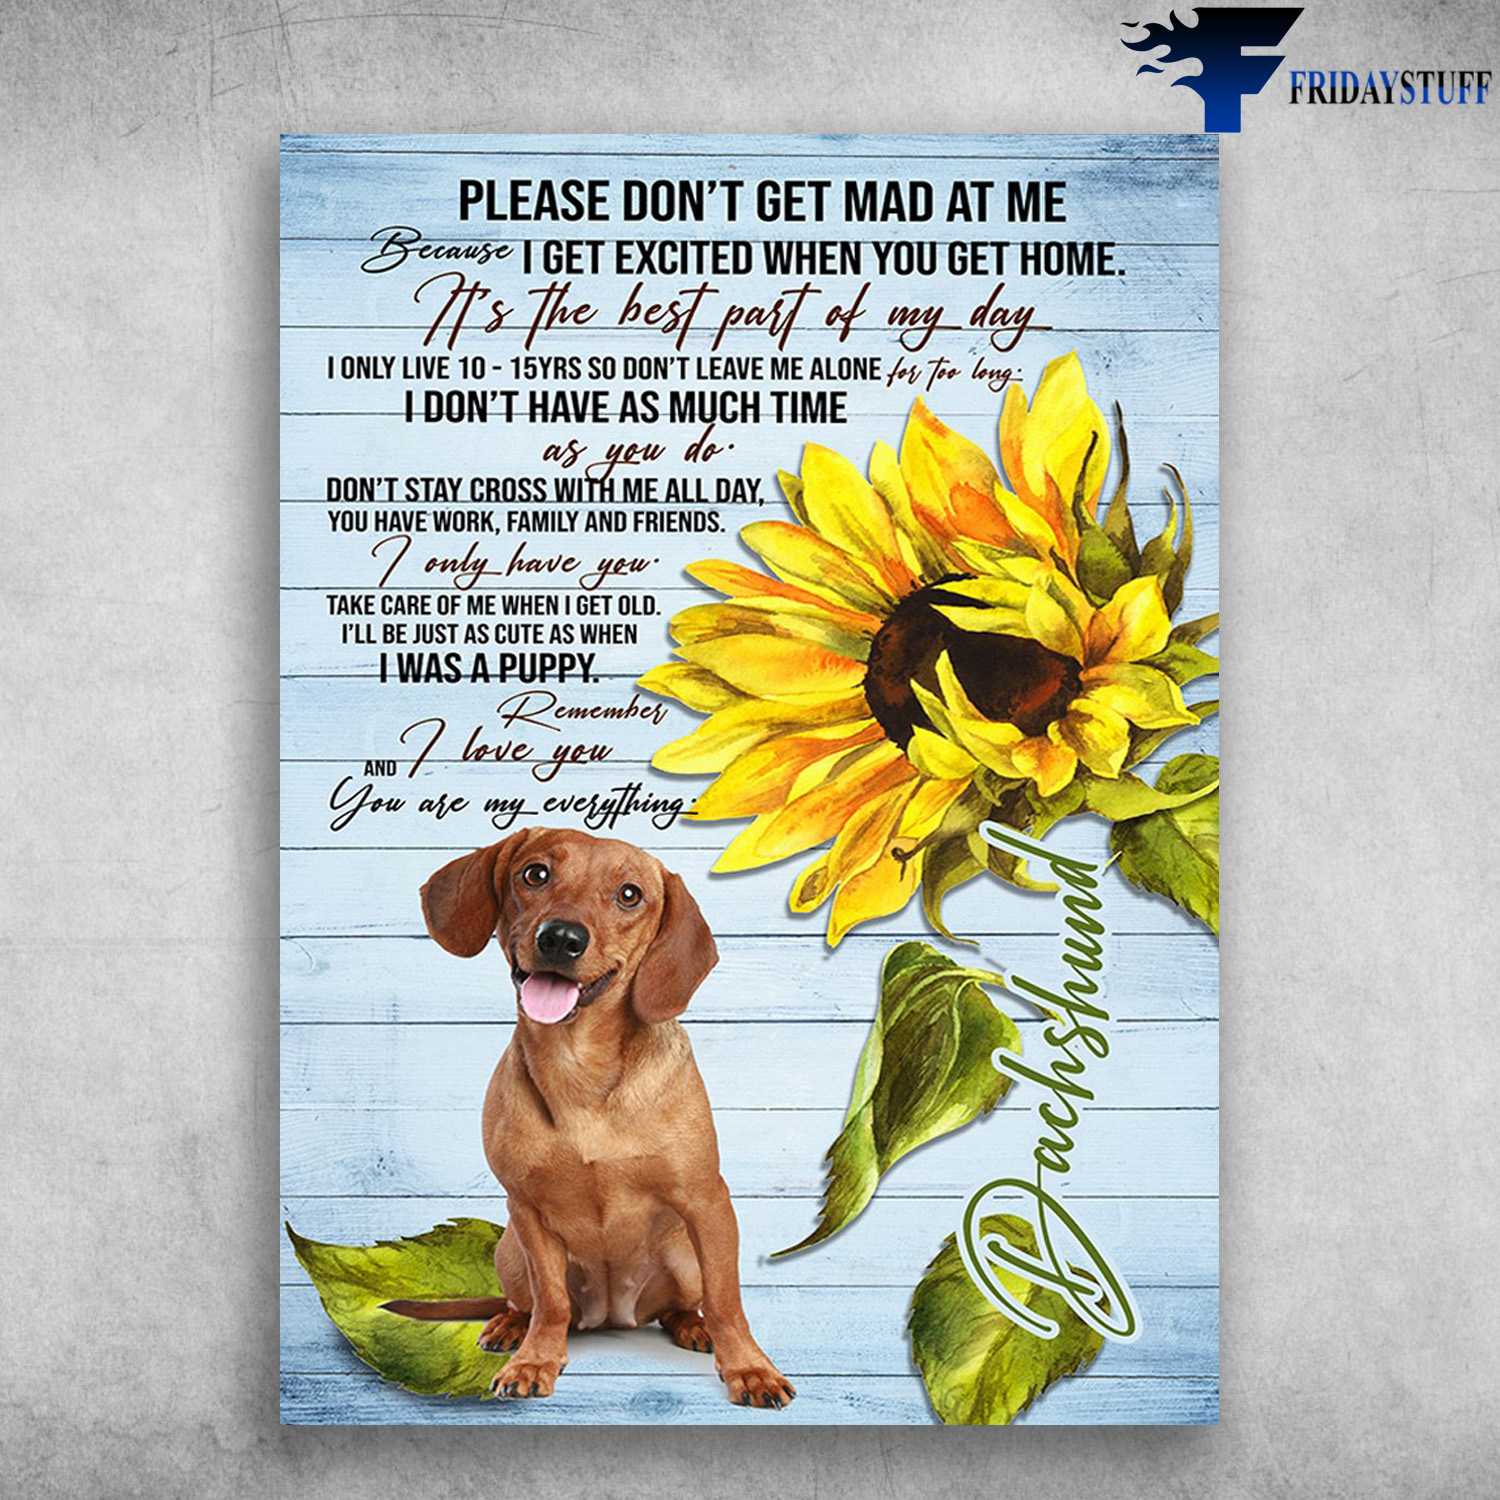 Dachshund Sunflower, Dog Lover - Please Don't Get Mad At Me, Because I Get Excited When You Get Home, It's The Best Part Of My Day, I Only Live 10-15Rs So Don't Leave Me Alone